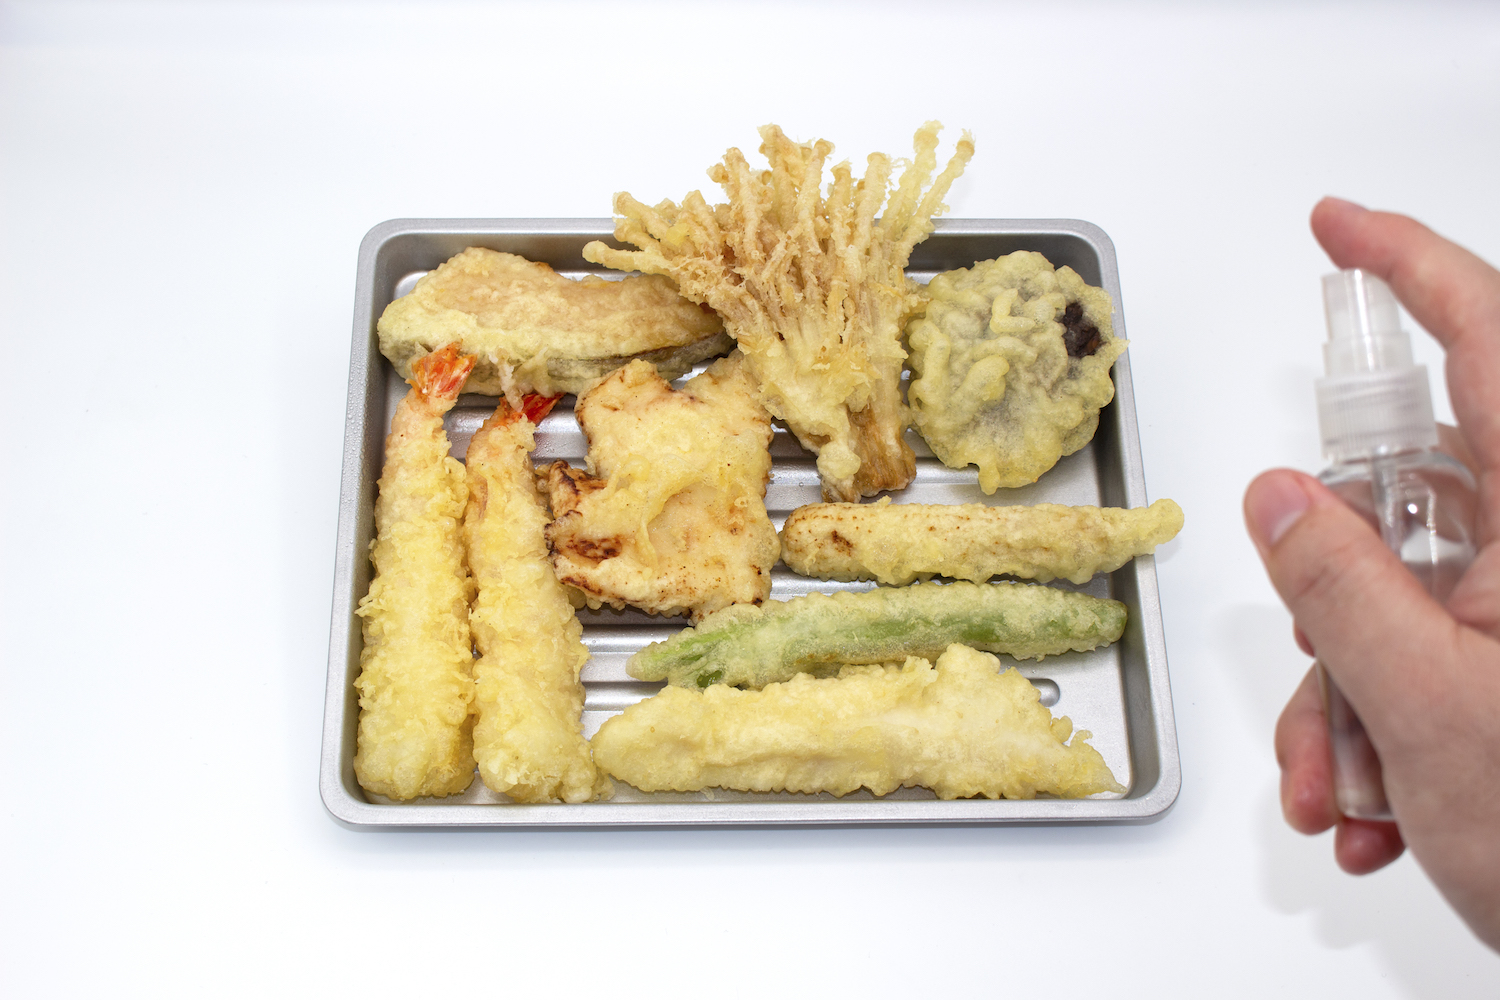 Step 1. Lay tempura on a tray and moisten it by spraying it with water